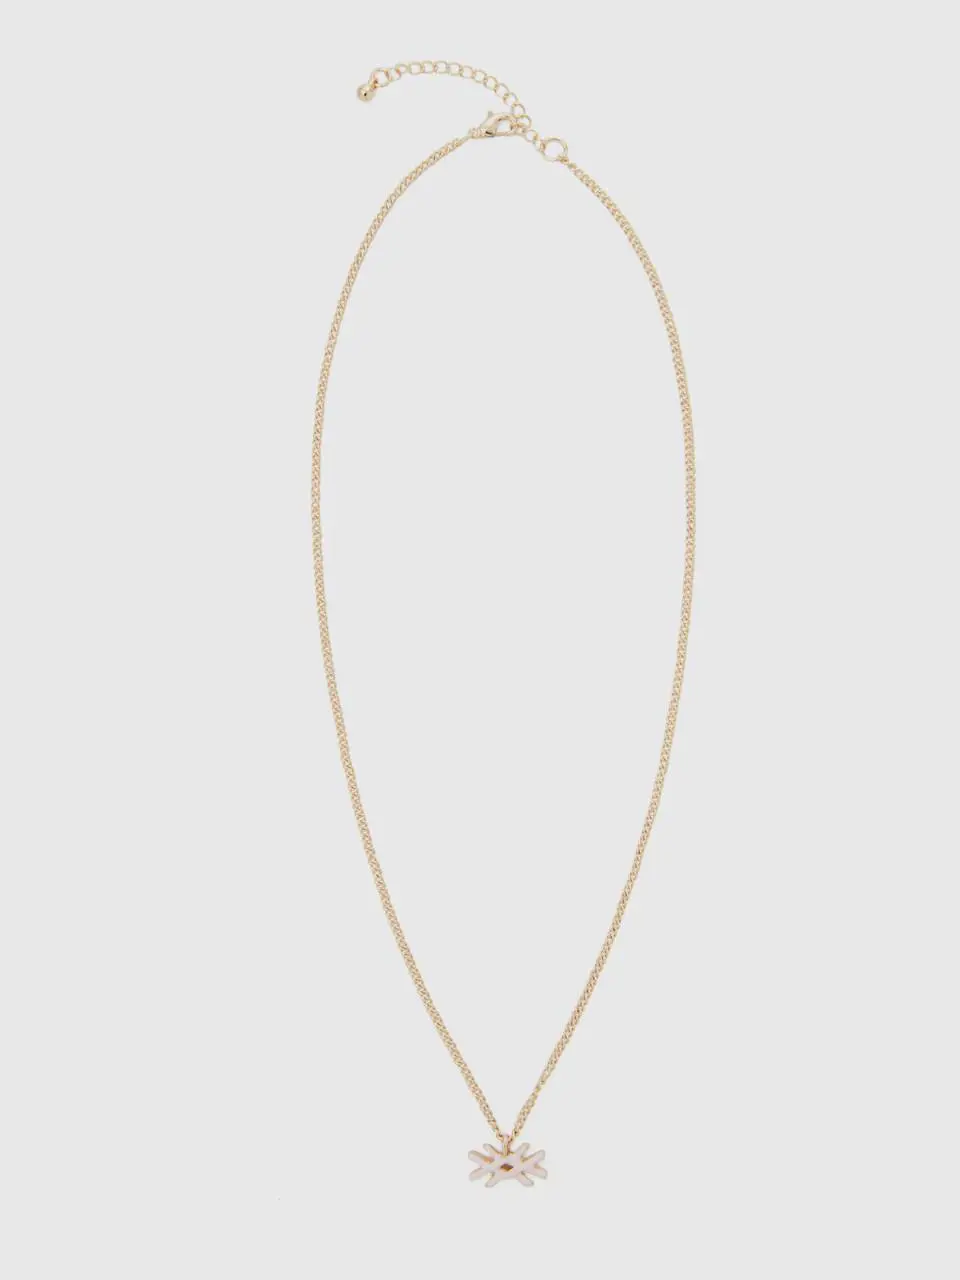 Benetton necklace with light pink logo pendant. 1